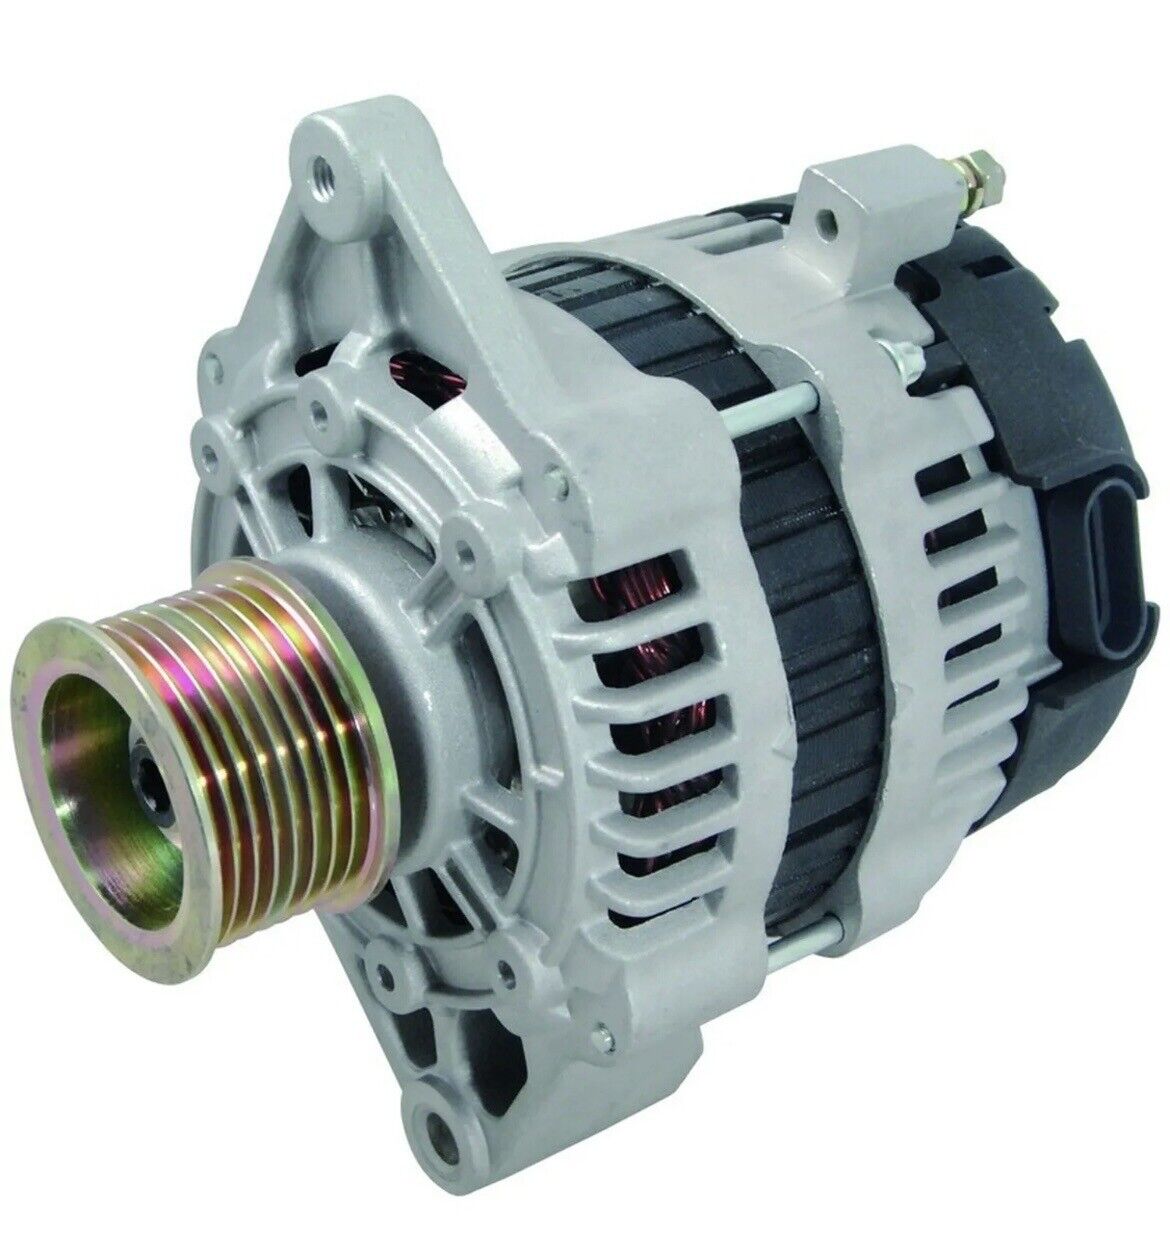 New Alternator For Trackless MT V Series 2005-2010 95 Amp Replaces Delco 11SI